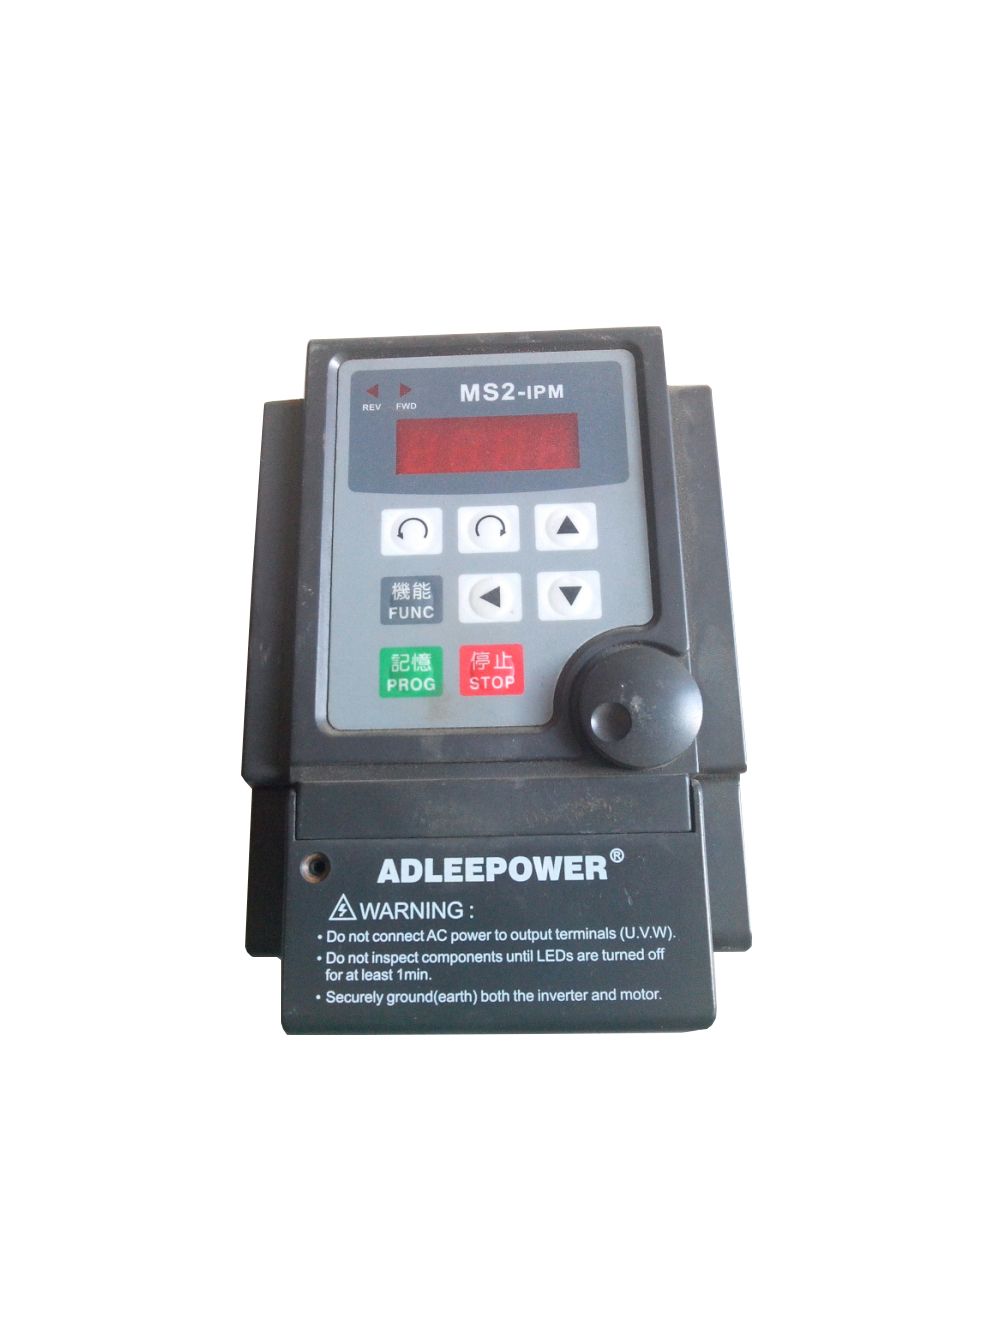 New In stock for sale, Adleepower VFD Frequency Converter MS2-115